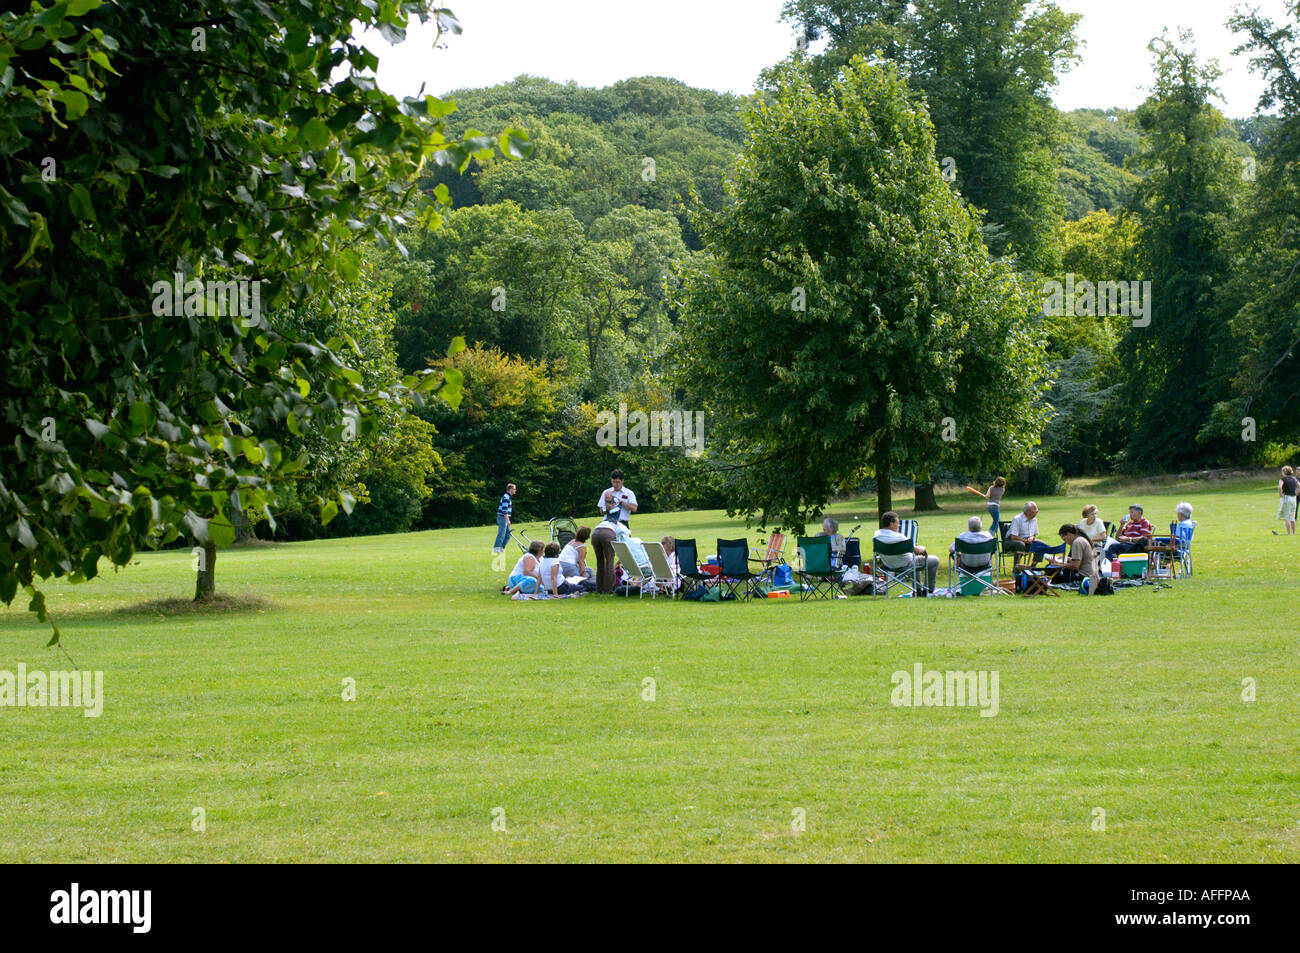 Group of people on lawn Blaise Castle Estate Bristol England Stock Photo